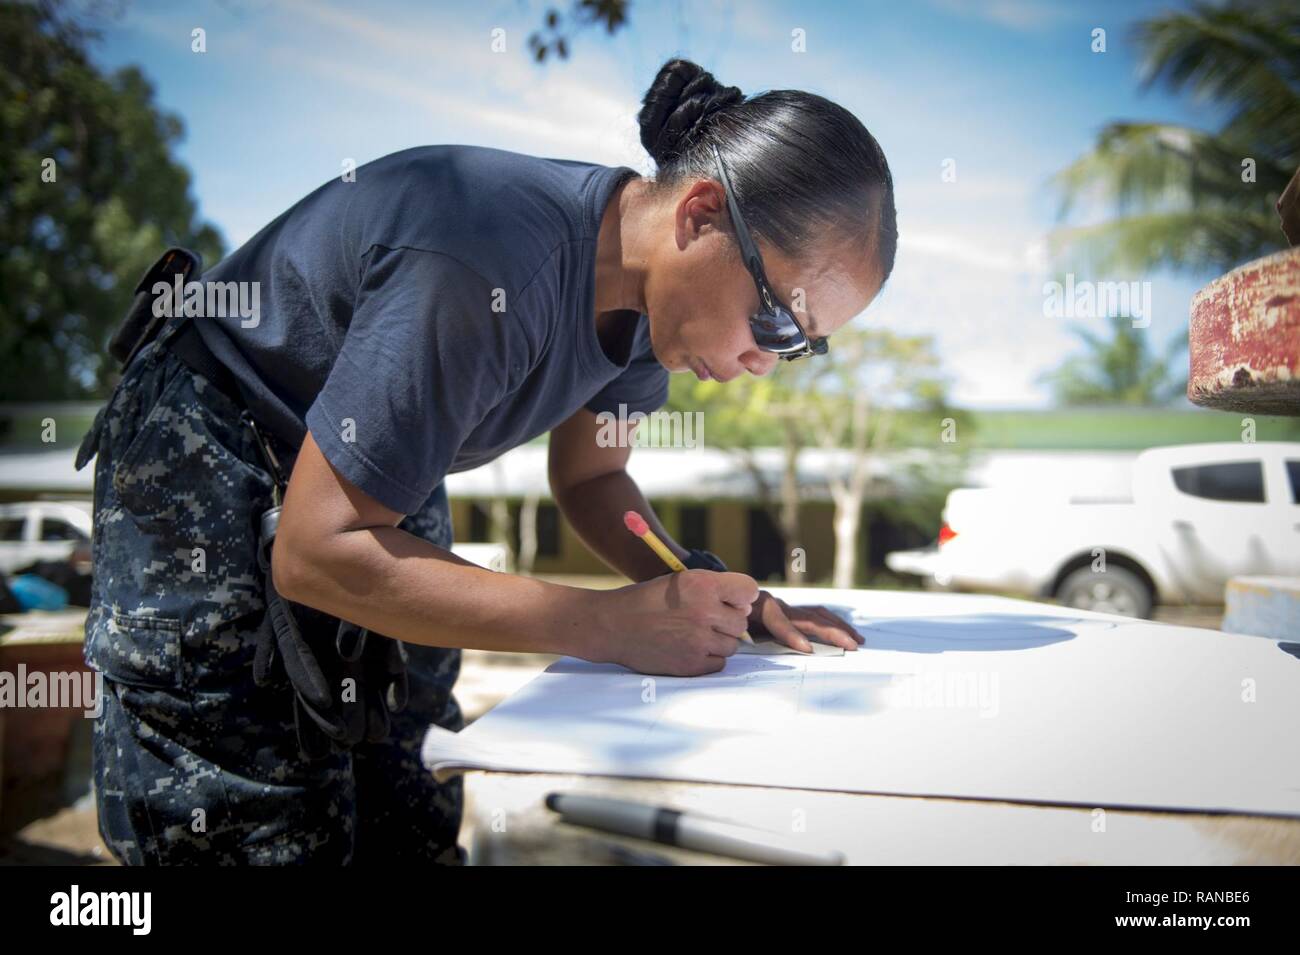 TRUJILLO, Honduras (Feb. 20, 2017) – Hospital Corpsman 2nd Class Kristine Perales, a native of Cebu, the Philippines, assigned to the Naval Branch Health Clinic Mayport, Fla., makes a sign to assist patients at the Continuing Promise 2017 (CP-17) medical site in support of CP-17's visit to Trujillo, Honduras. CP-17 is a U.S. Southern Command-sponsored and U.S. Naval Forces Southern Command/U.S. 4th Fleet-conducted deployment to conduct civil-military operations including humanitarian assistance, training engagements, and medical, dental, and veterinary support in an effort to show U.S. support Stock Photo